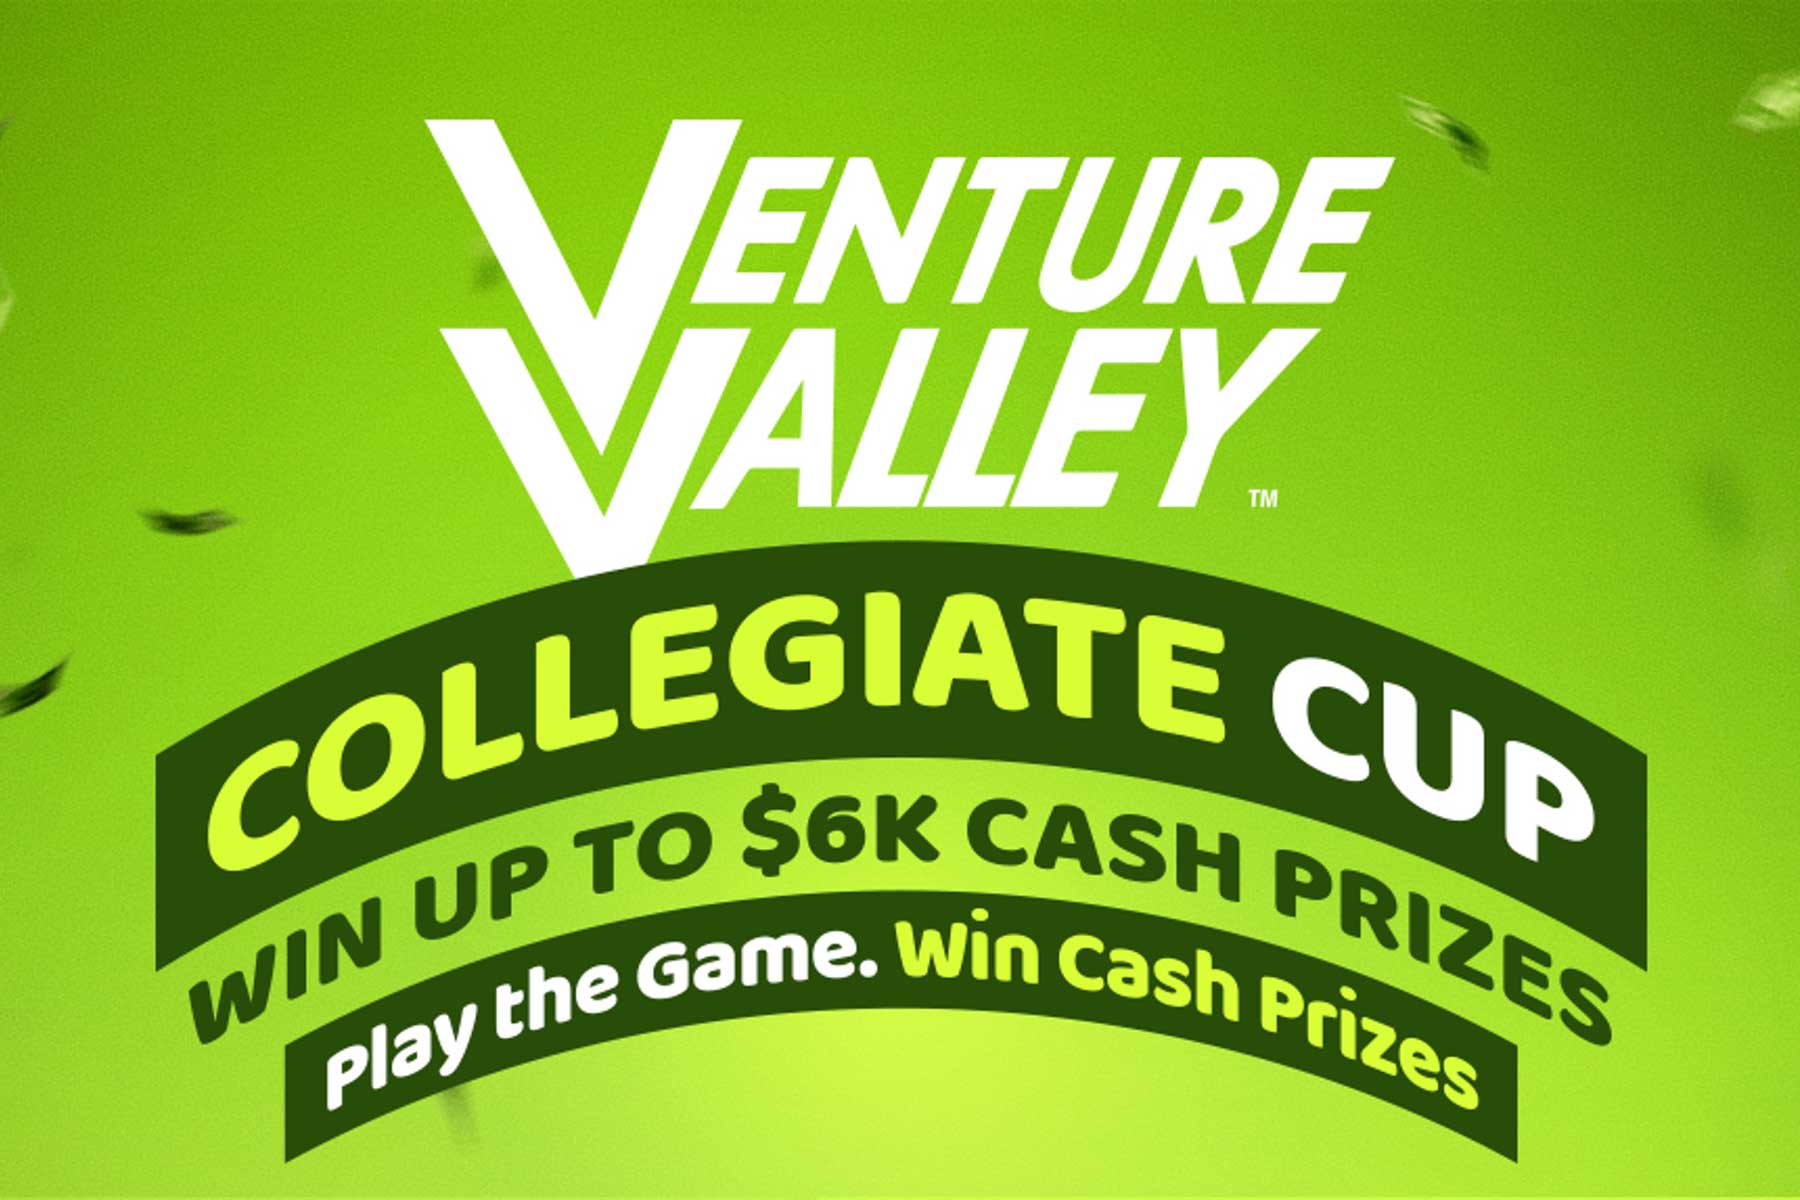 Top prize in the event is $2,000, while 2nd and 3rd place will take home $1,000 and $500, respectively.